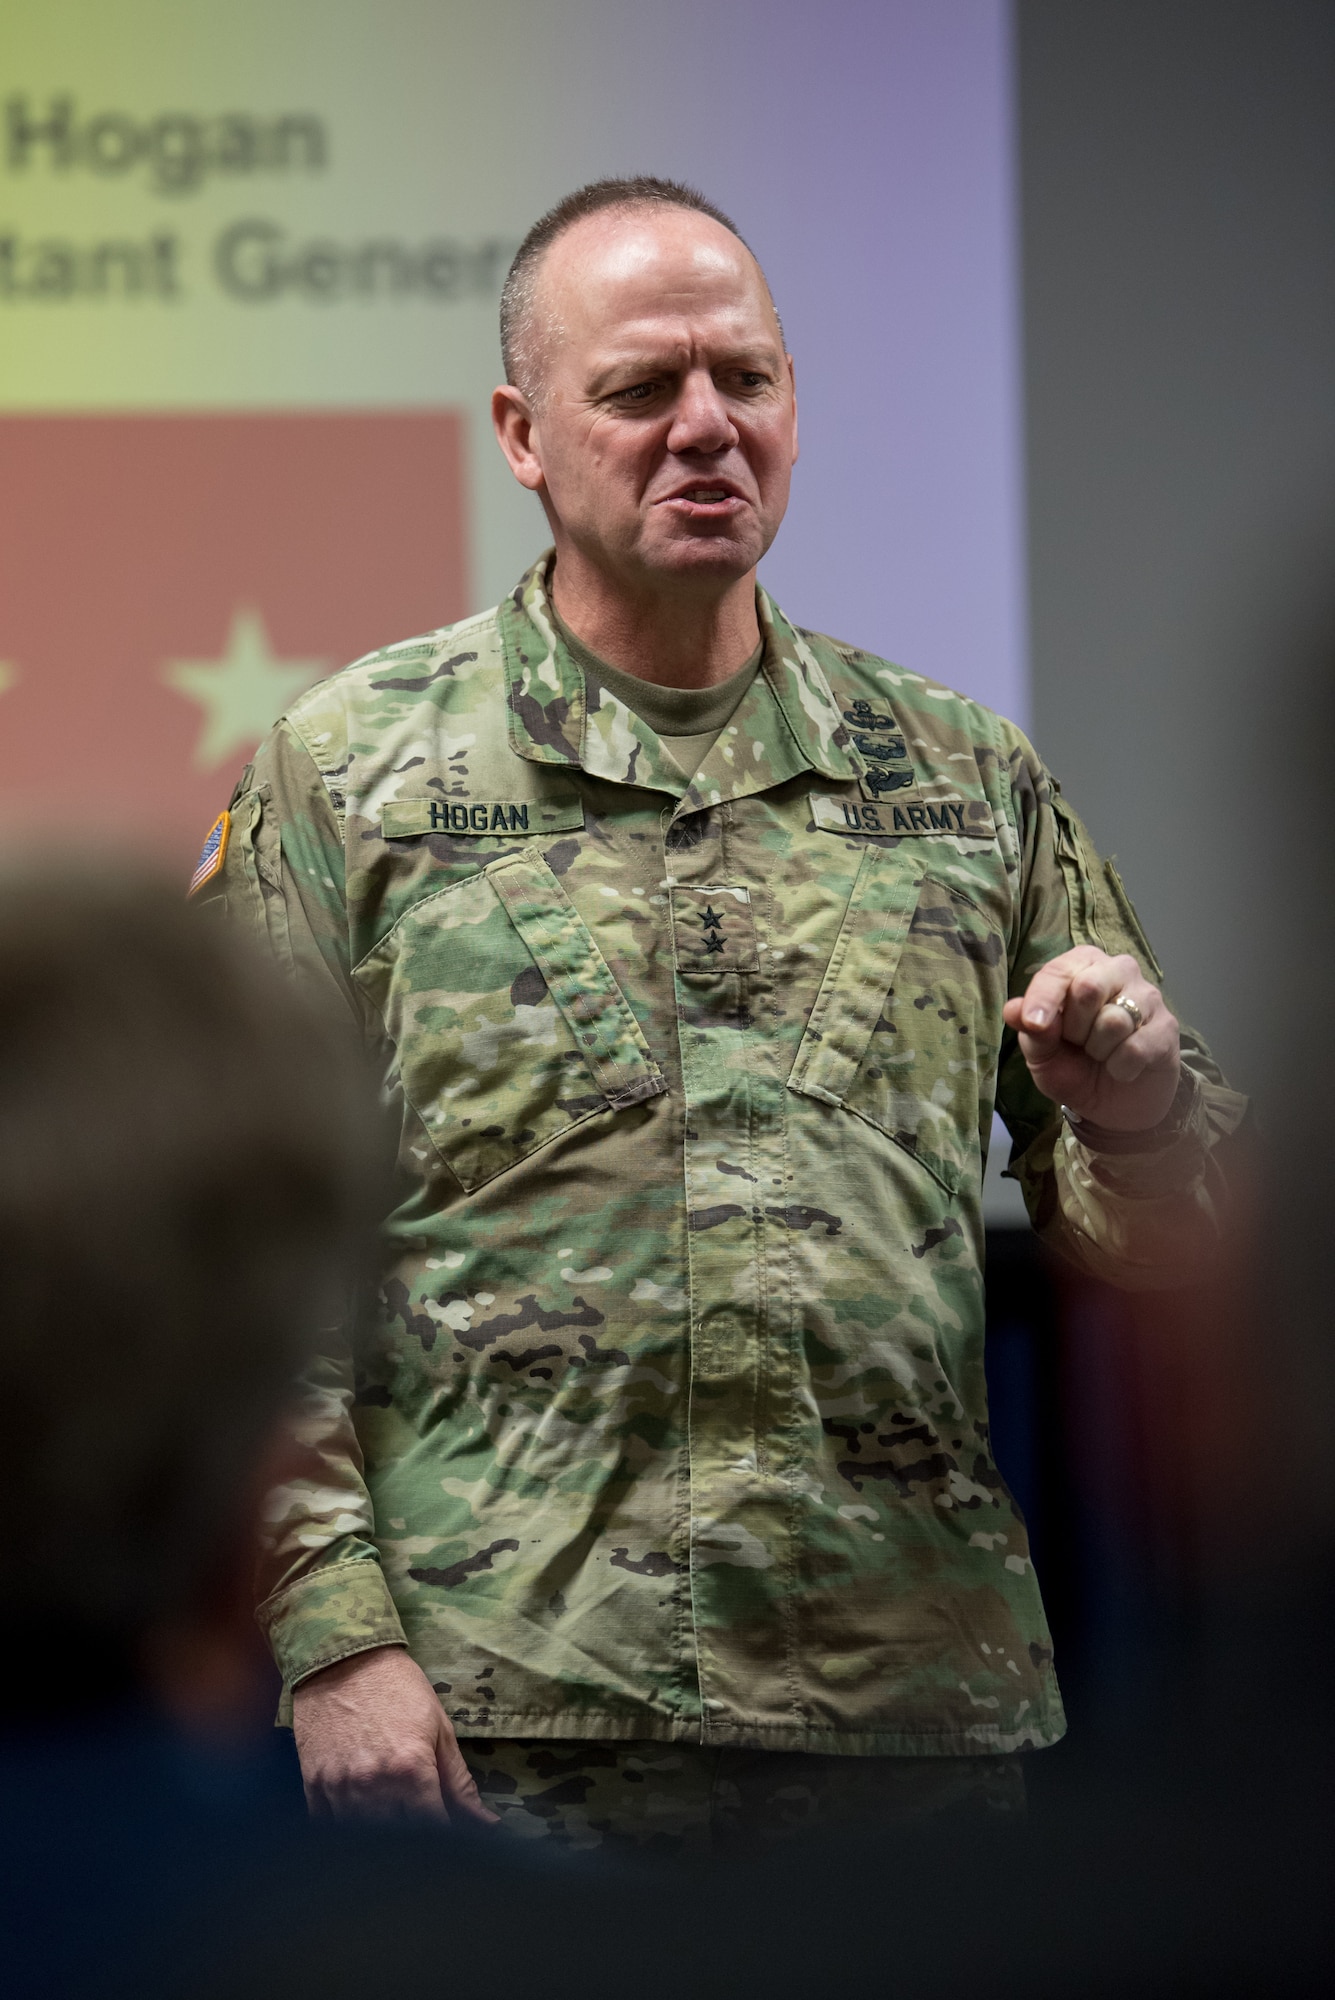 U.S. Army Maj. Gen. Stephen Hogan, Kentucky’s adjutant general, provides an introductory brief to civilian employers at the Kentucky Air National Guard Base in Louisville, Ky., March 15, 2019, as part of an Employer Support of the Guard and Reserve “Bosslift." The program enhances awareness and understanding between National Guardsmen and the civilian employers for whom they work when they’re not on duty. (U.S. Air National Guard photo by Staff Sgt. Joshua Horton)